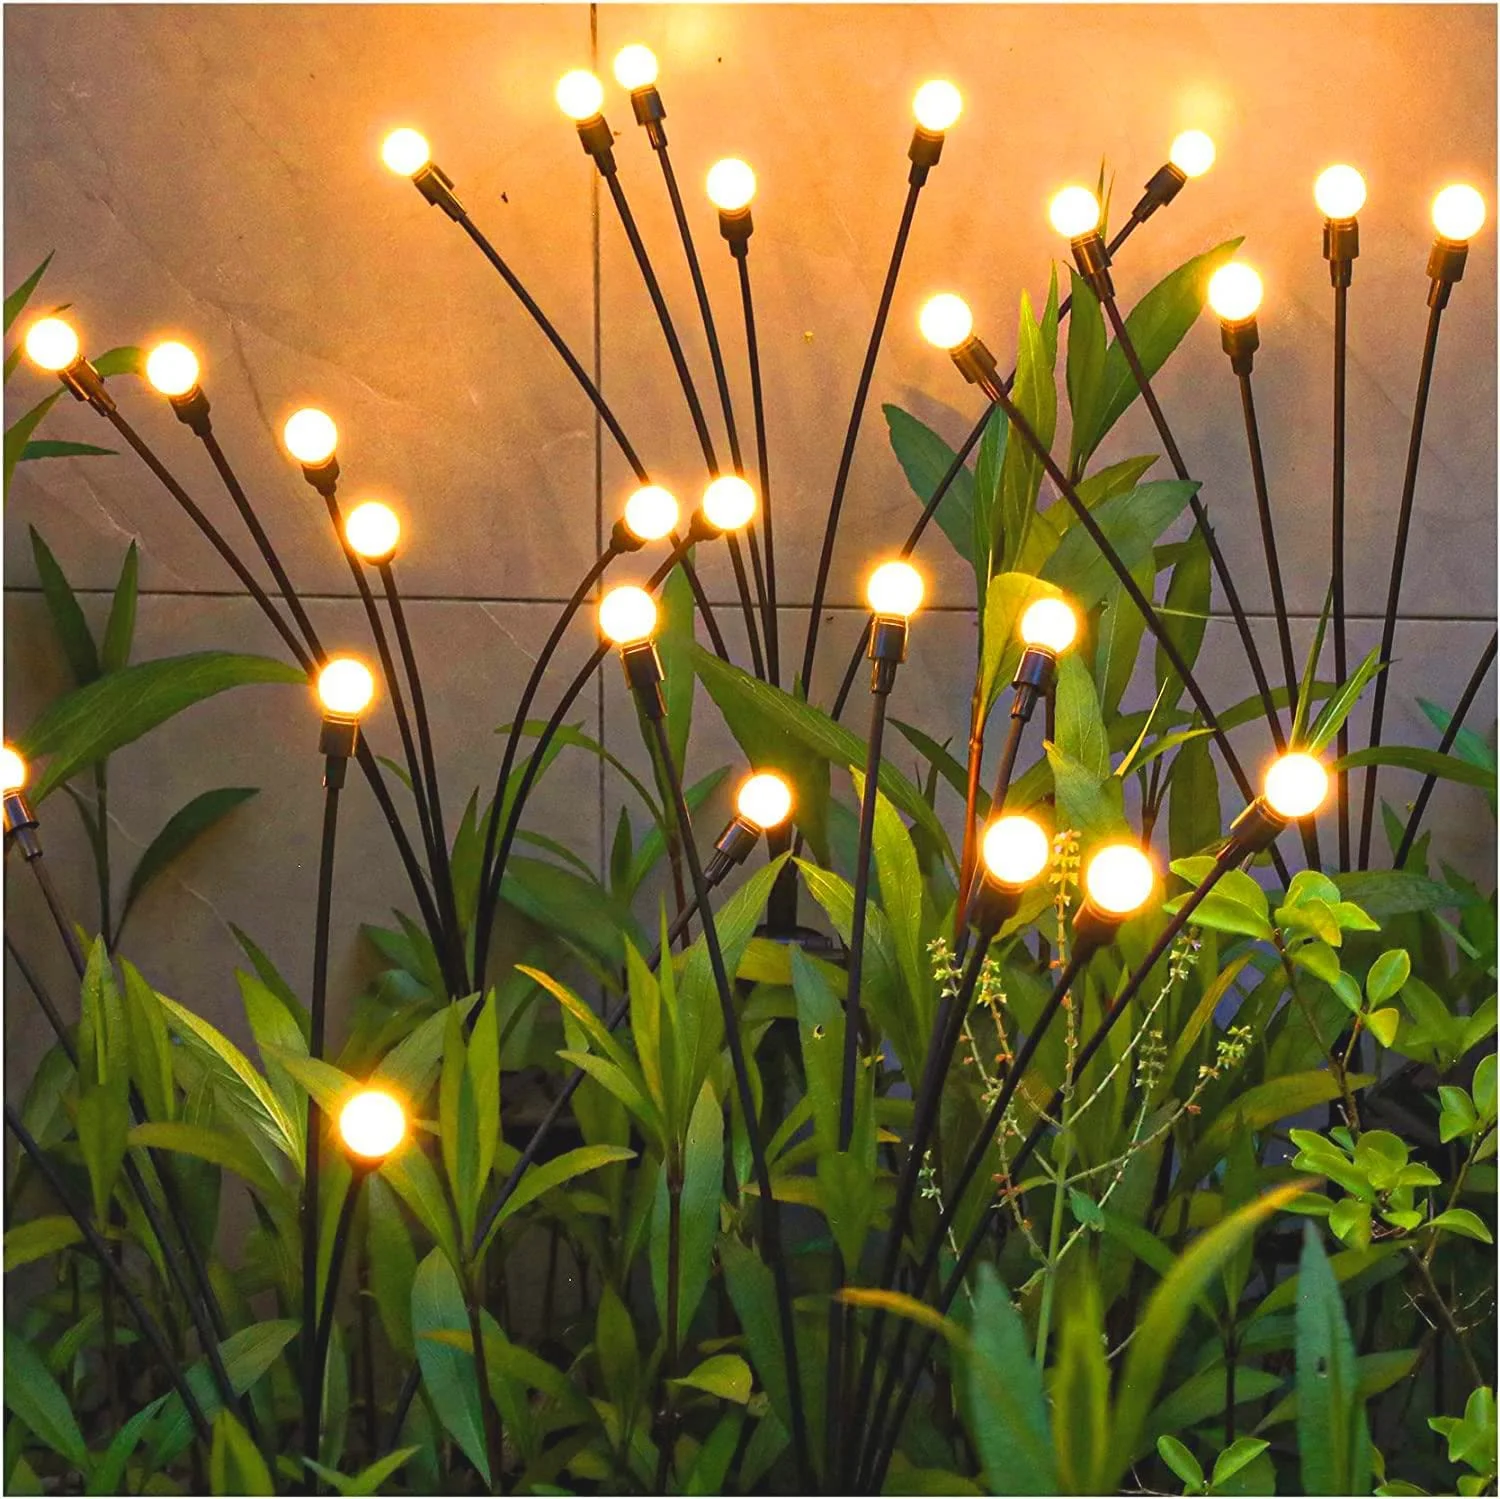 

1PC Solar Garden Firefly Lights Waterproof Outdoor Firefly Lamp Courtyard Decoration Lamps for Path Yard Patio Pathway Landscape